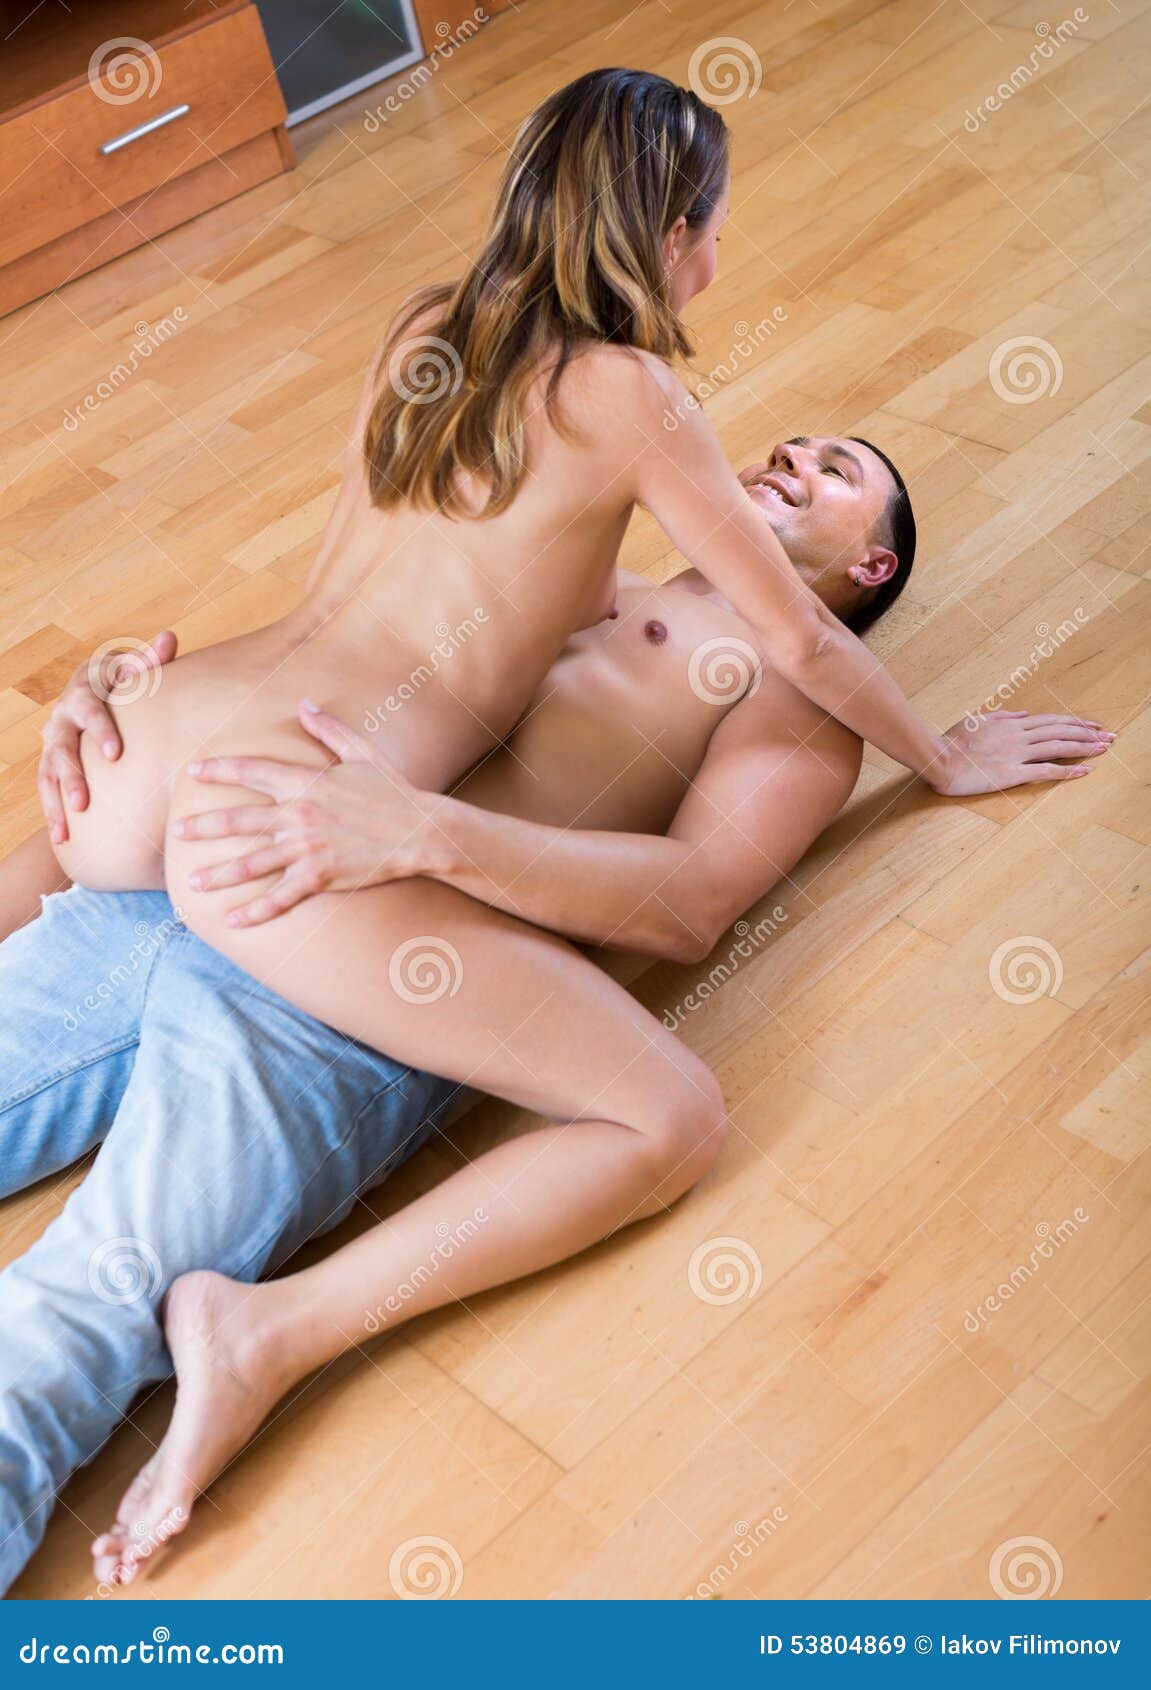 Woman and Man Making Love Indoor Stock Image hq nude photo